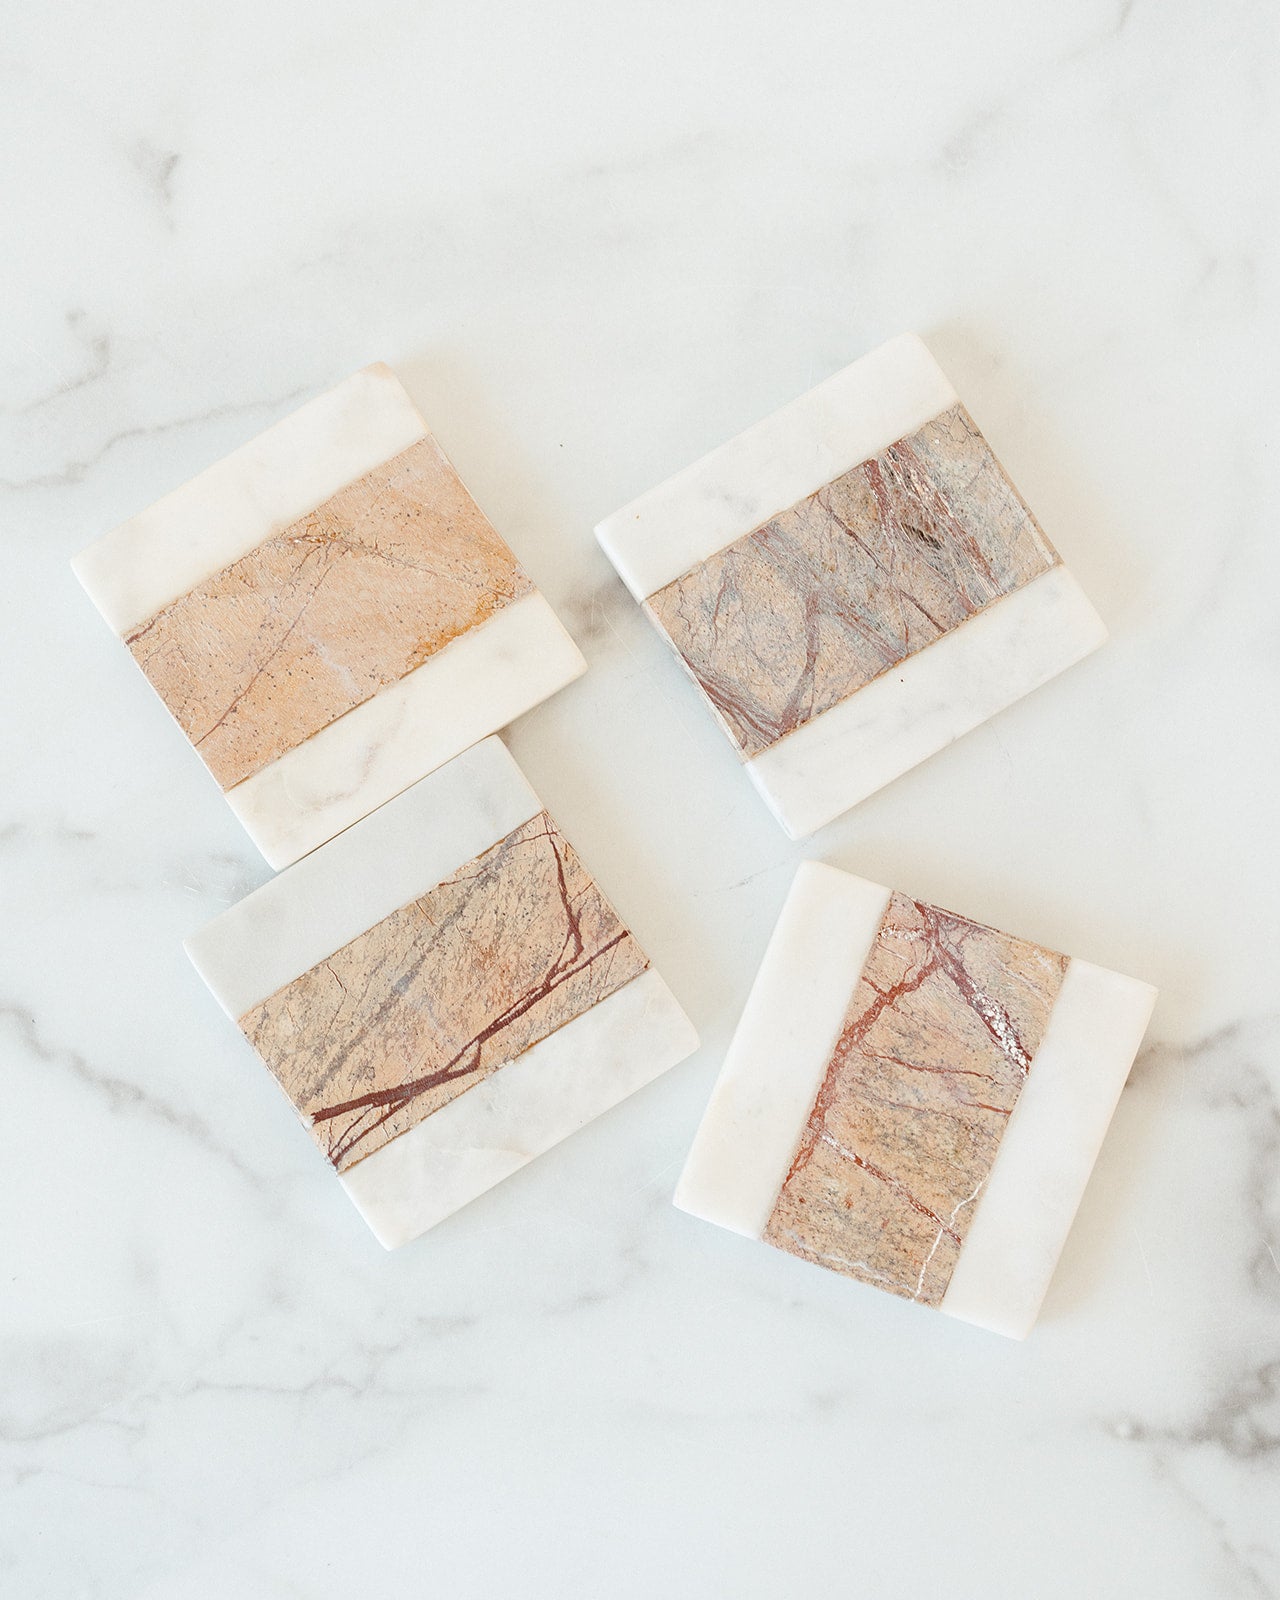 White & Natural Marble Coasters